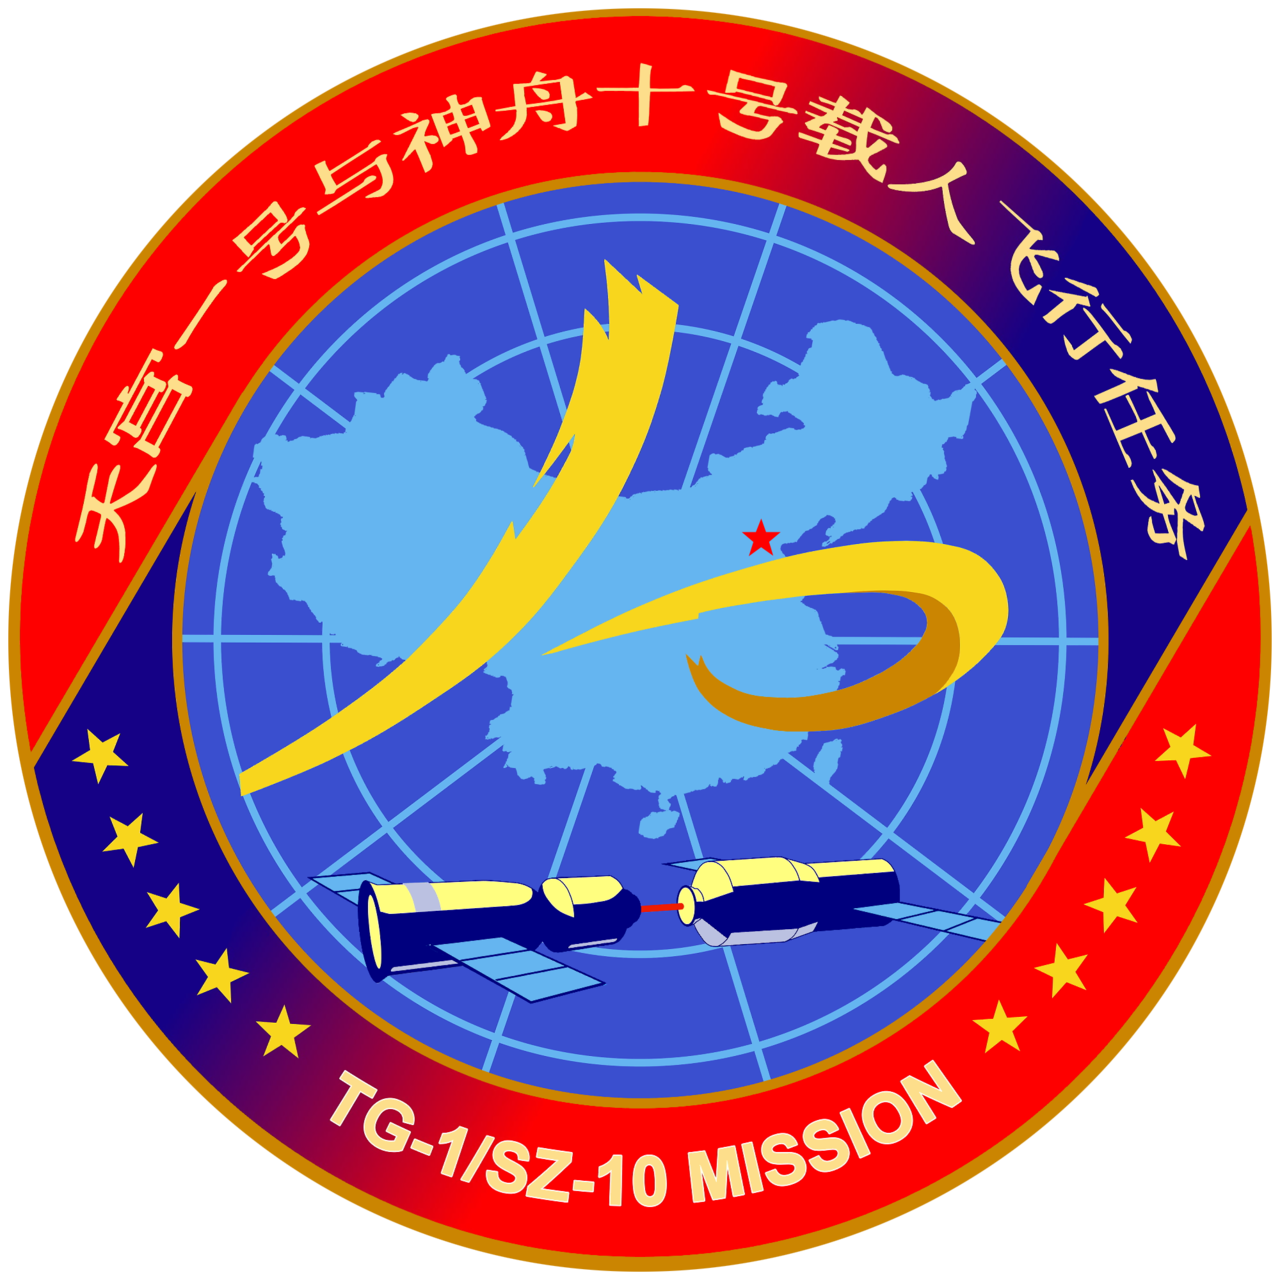 Mission patch for Shenzhou-10